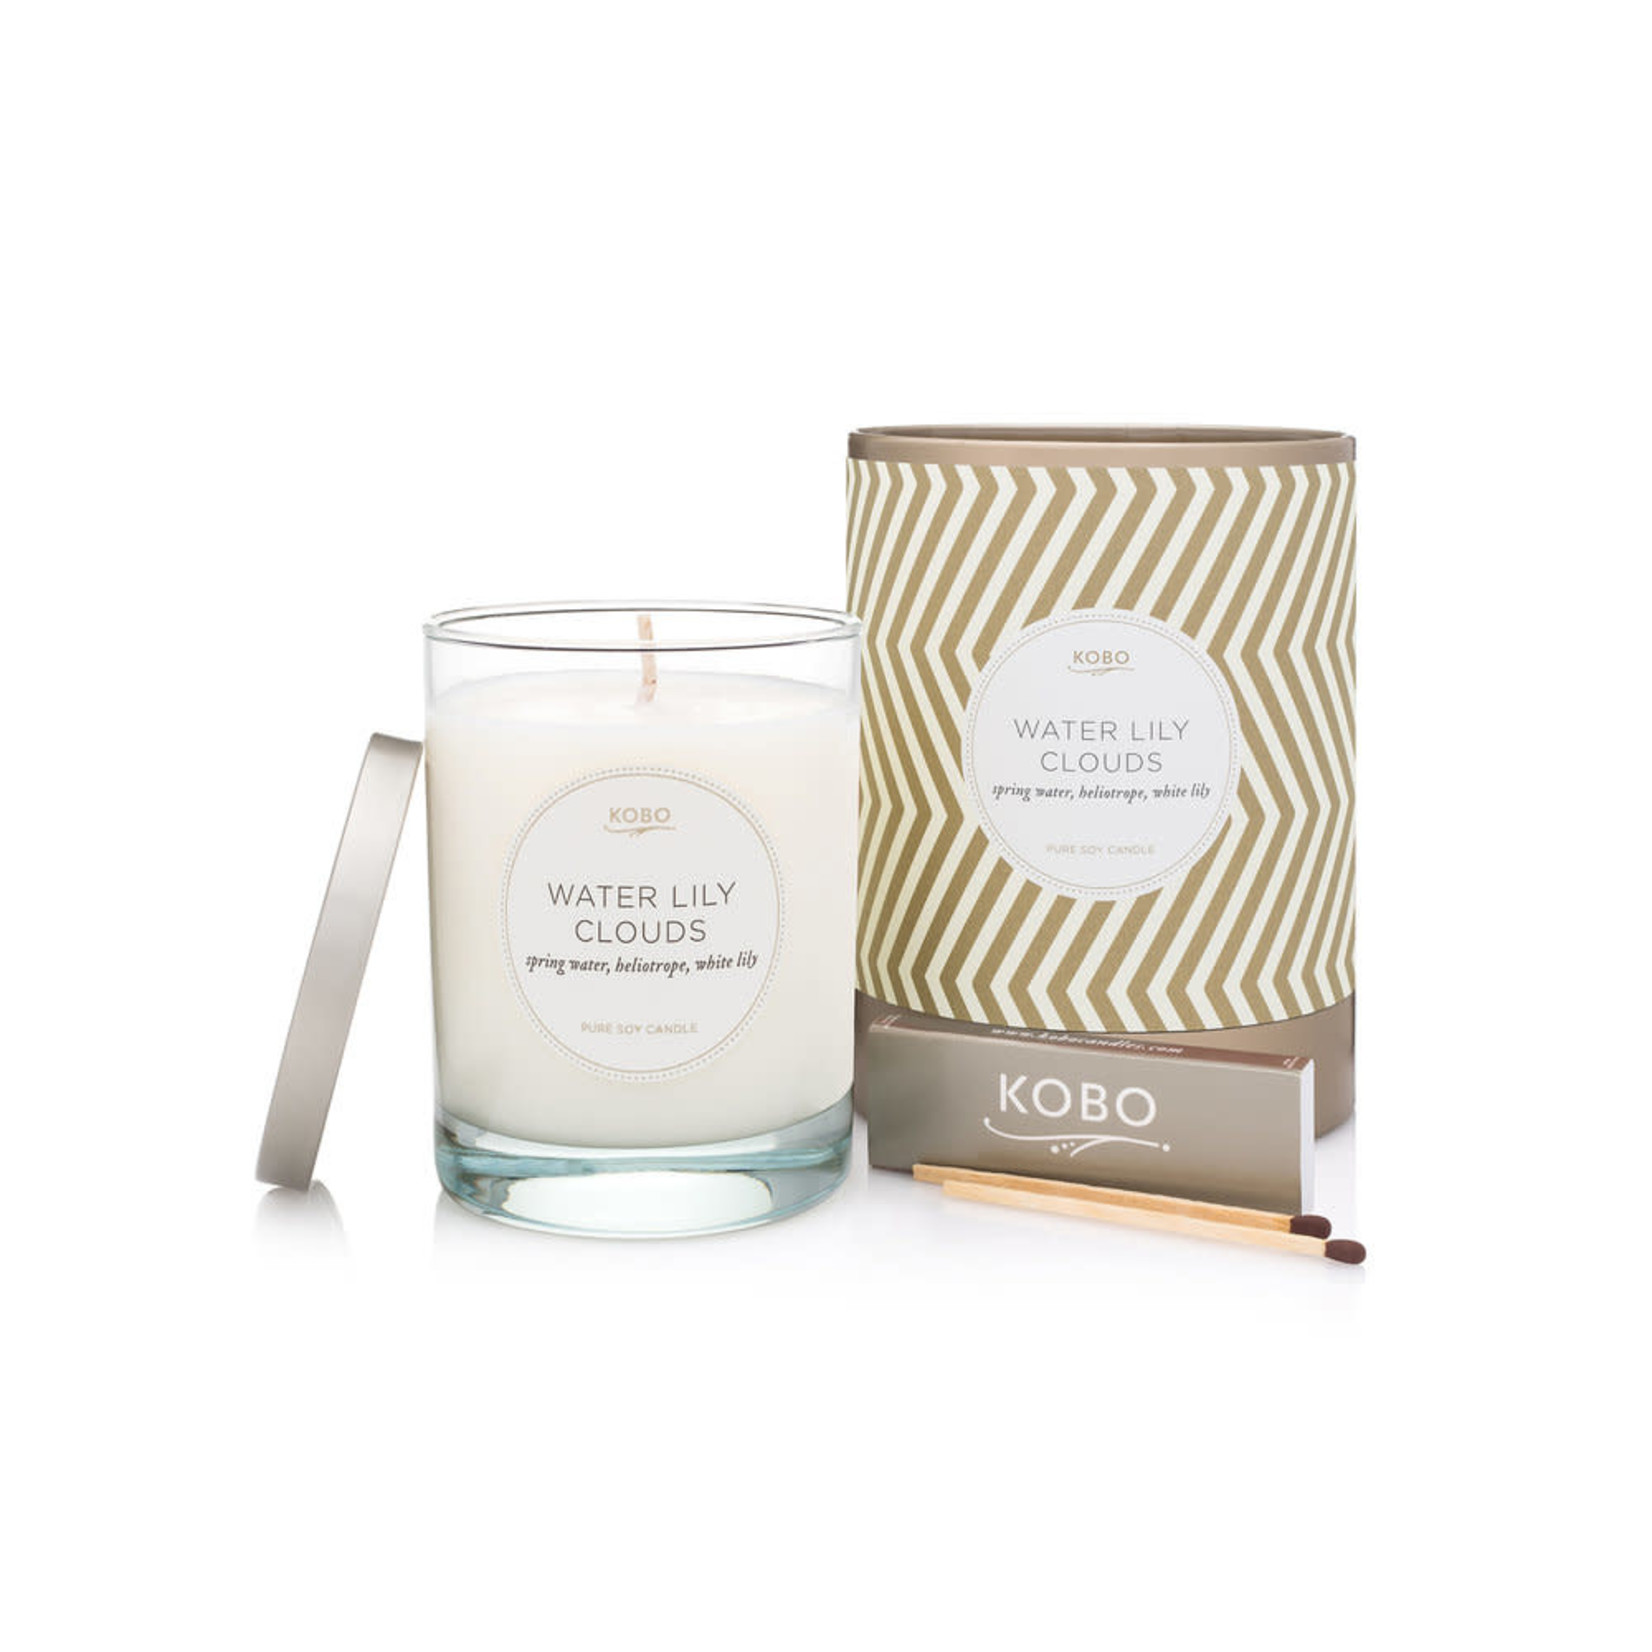 Kobo Water Lily Clouds Candle